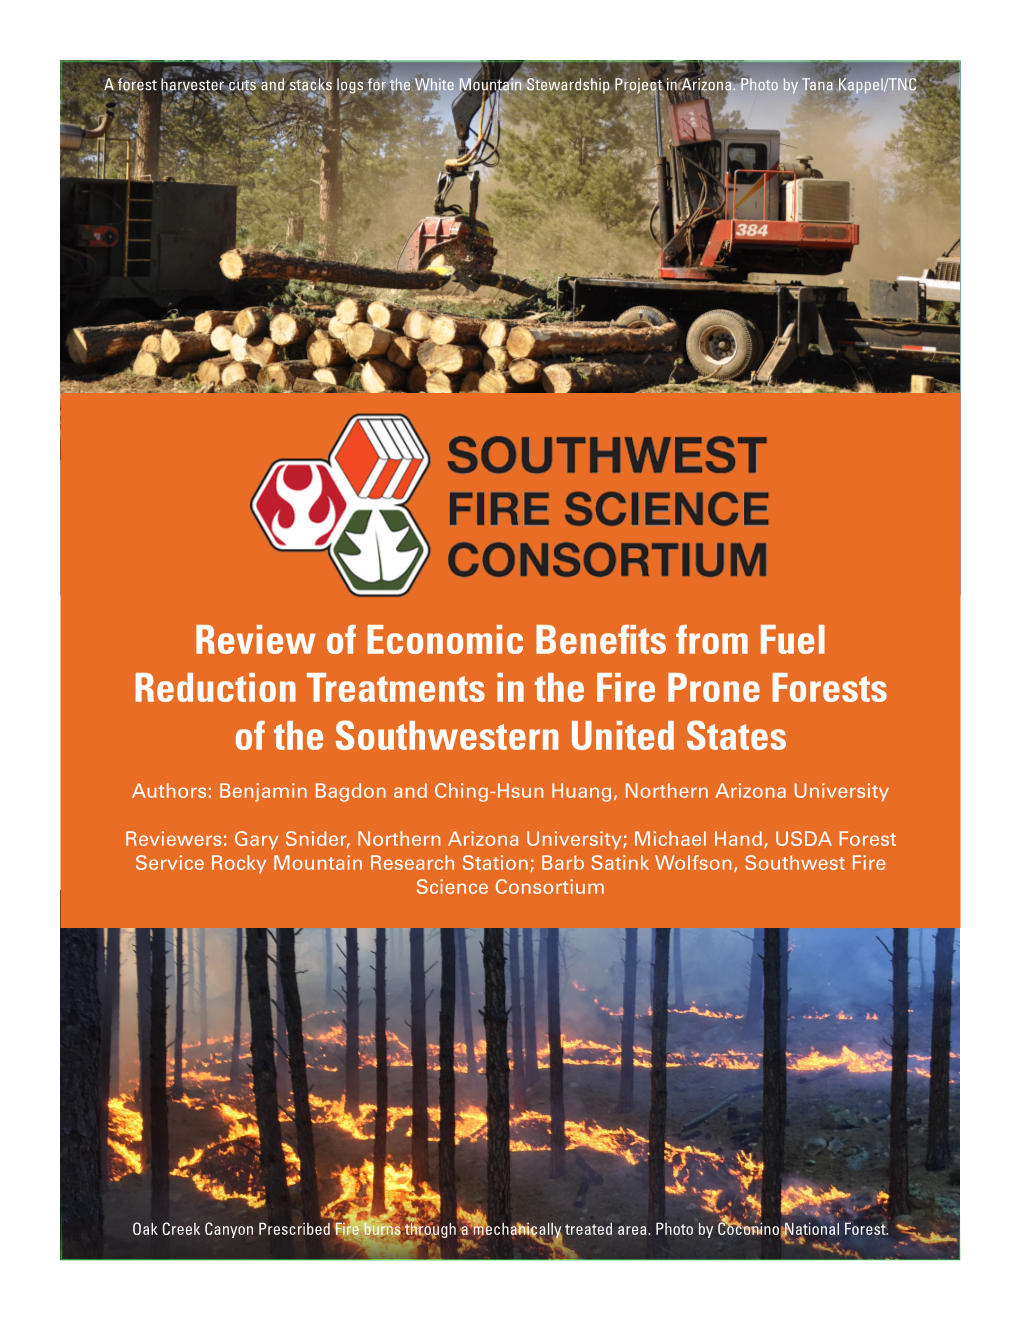 Review of Economic Benefits from Fuel Reduction Treatments in the Fire Prone Forests of the Southwestern United States